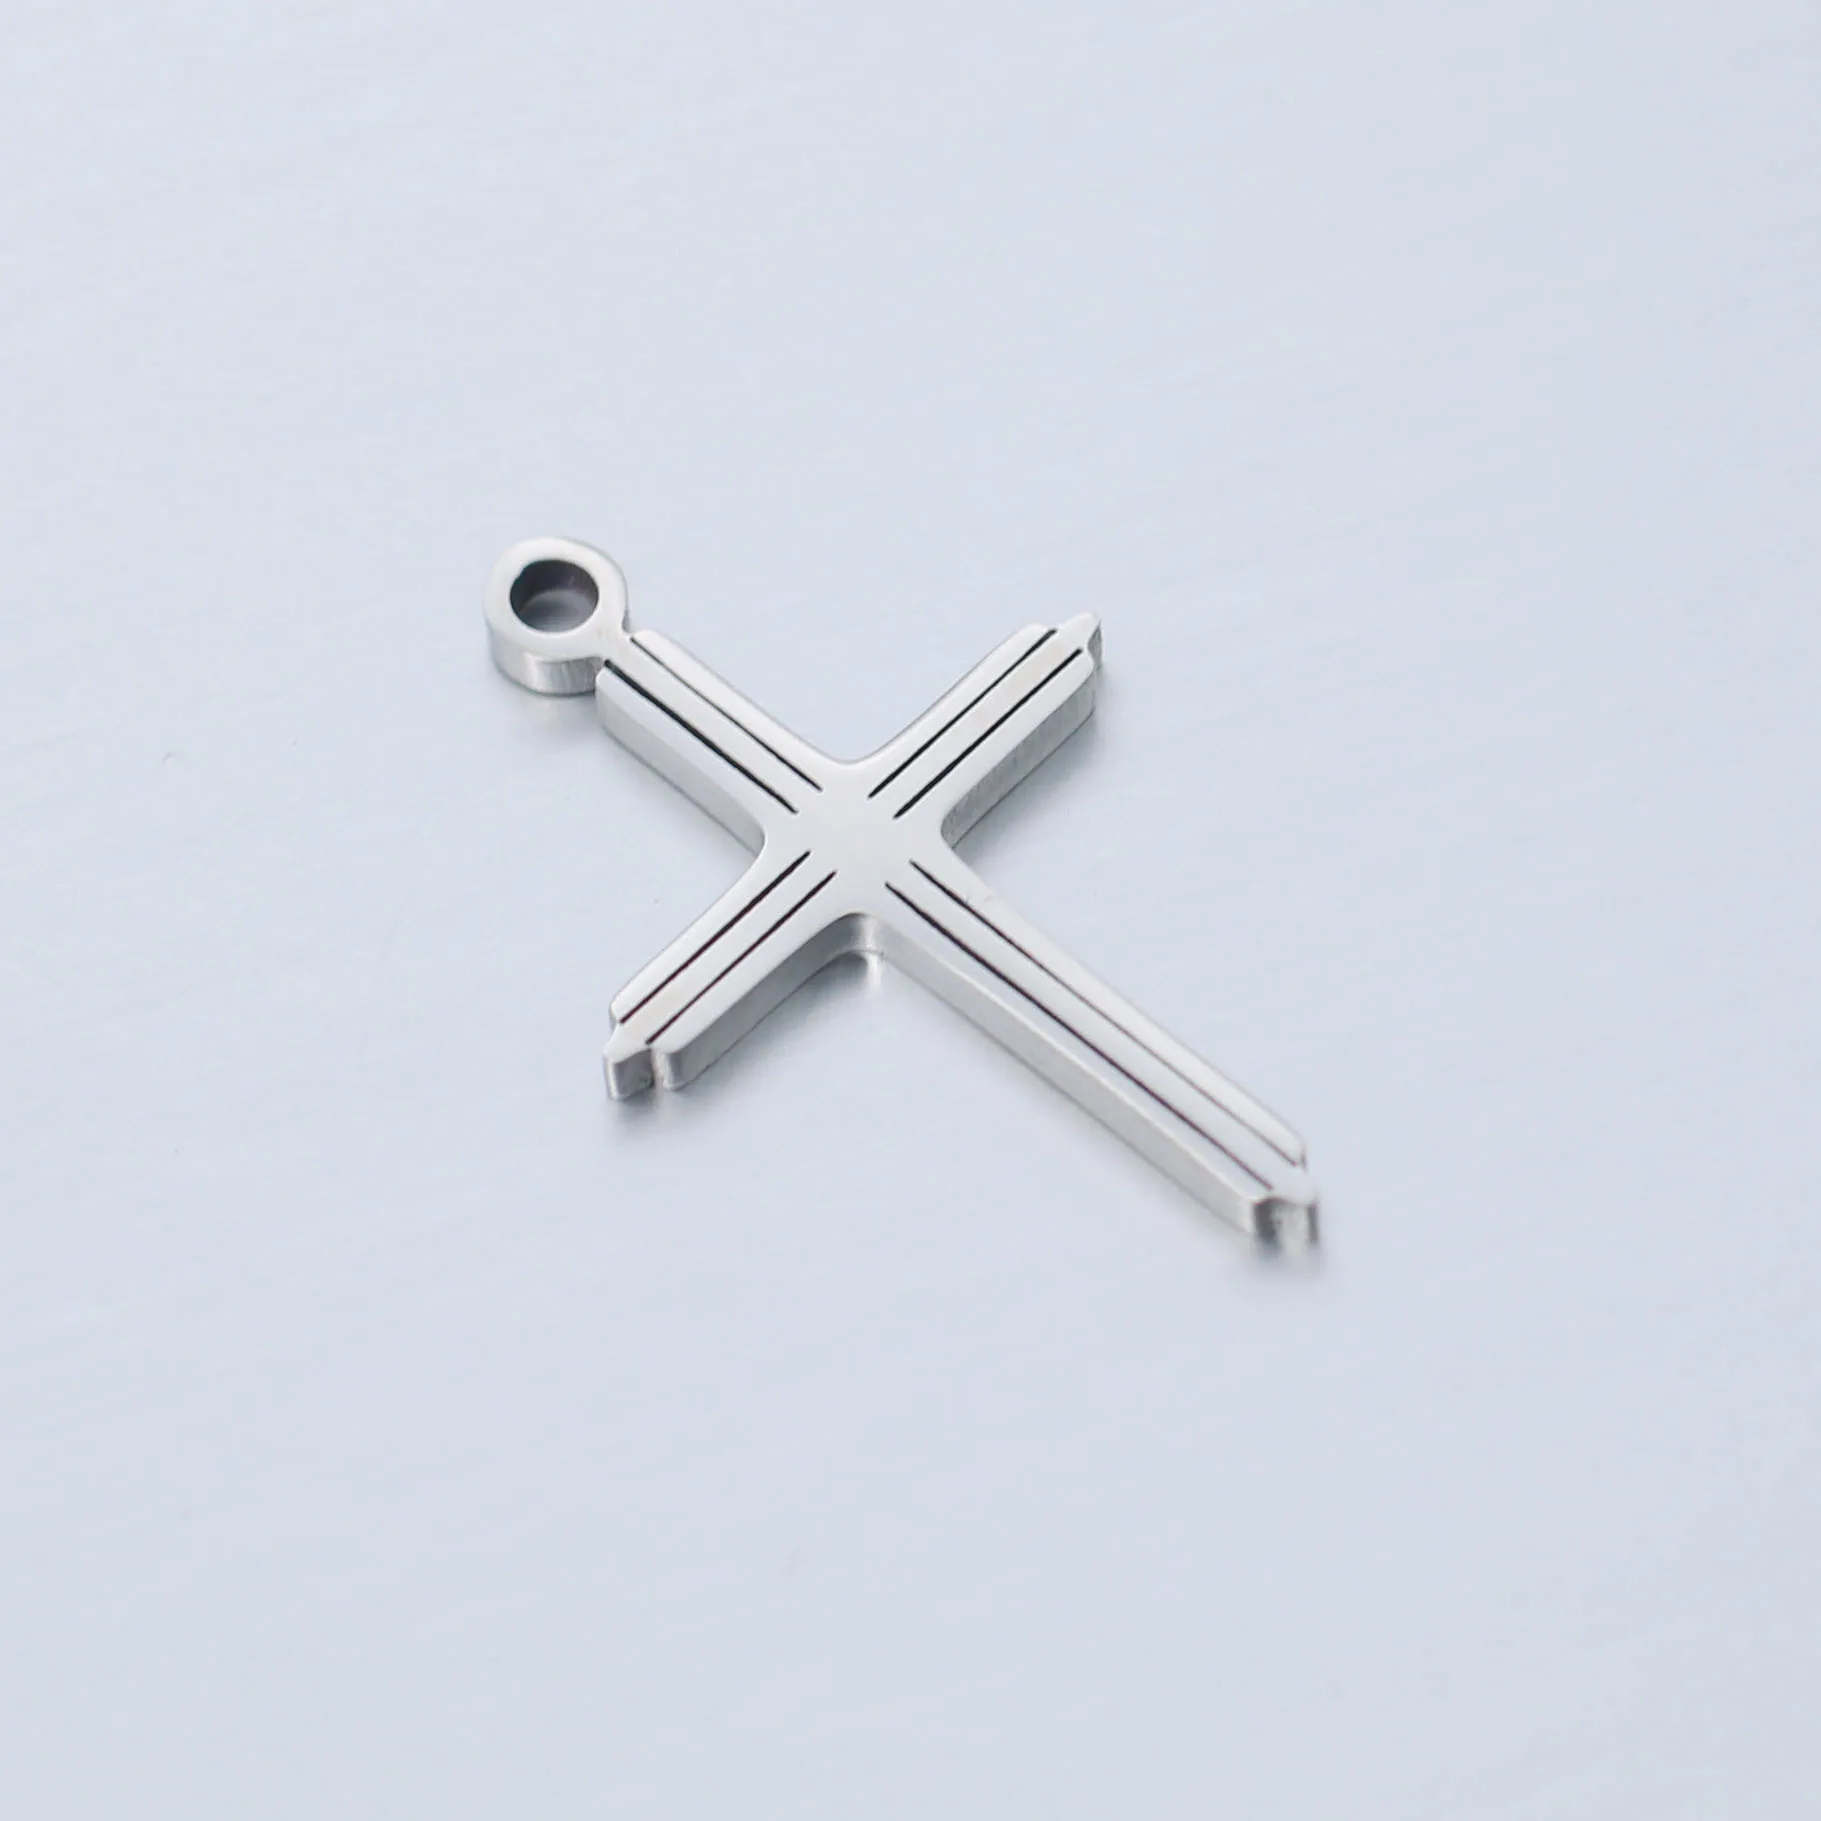 DOOYIO 5pcs/Lot Stainless Steel Metal Charms Crosses Pendant For Women DIY Necklace Bracelet Jewelry Making Accessories